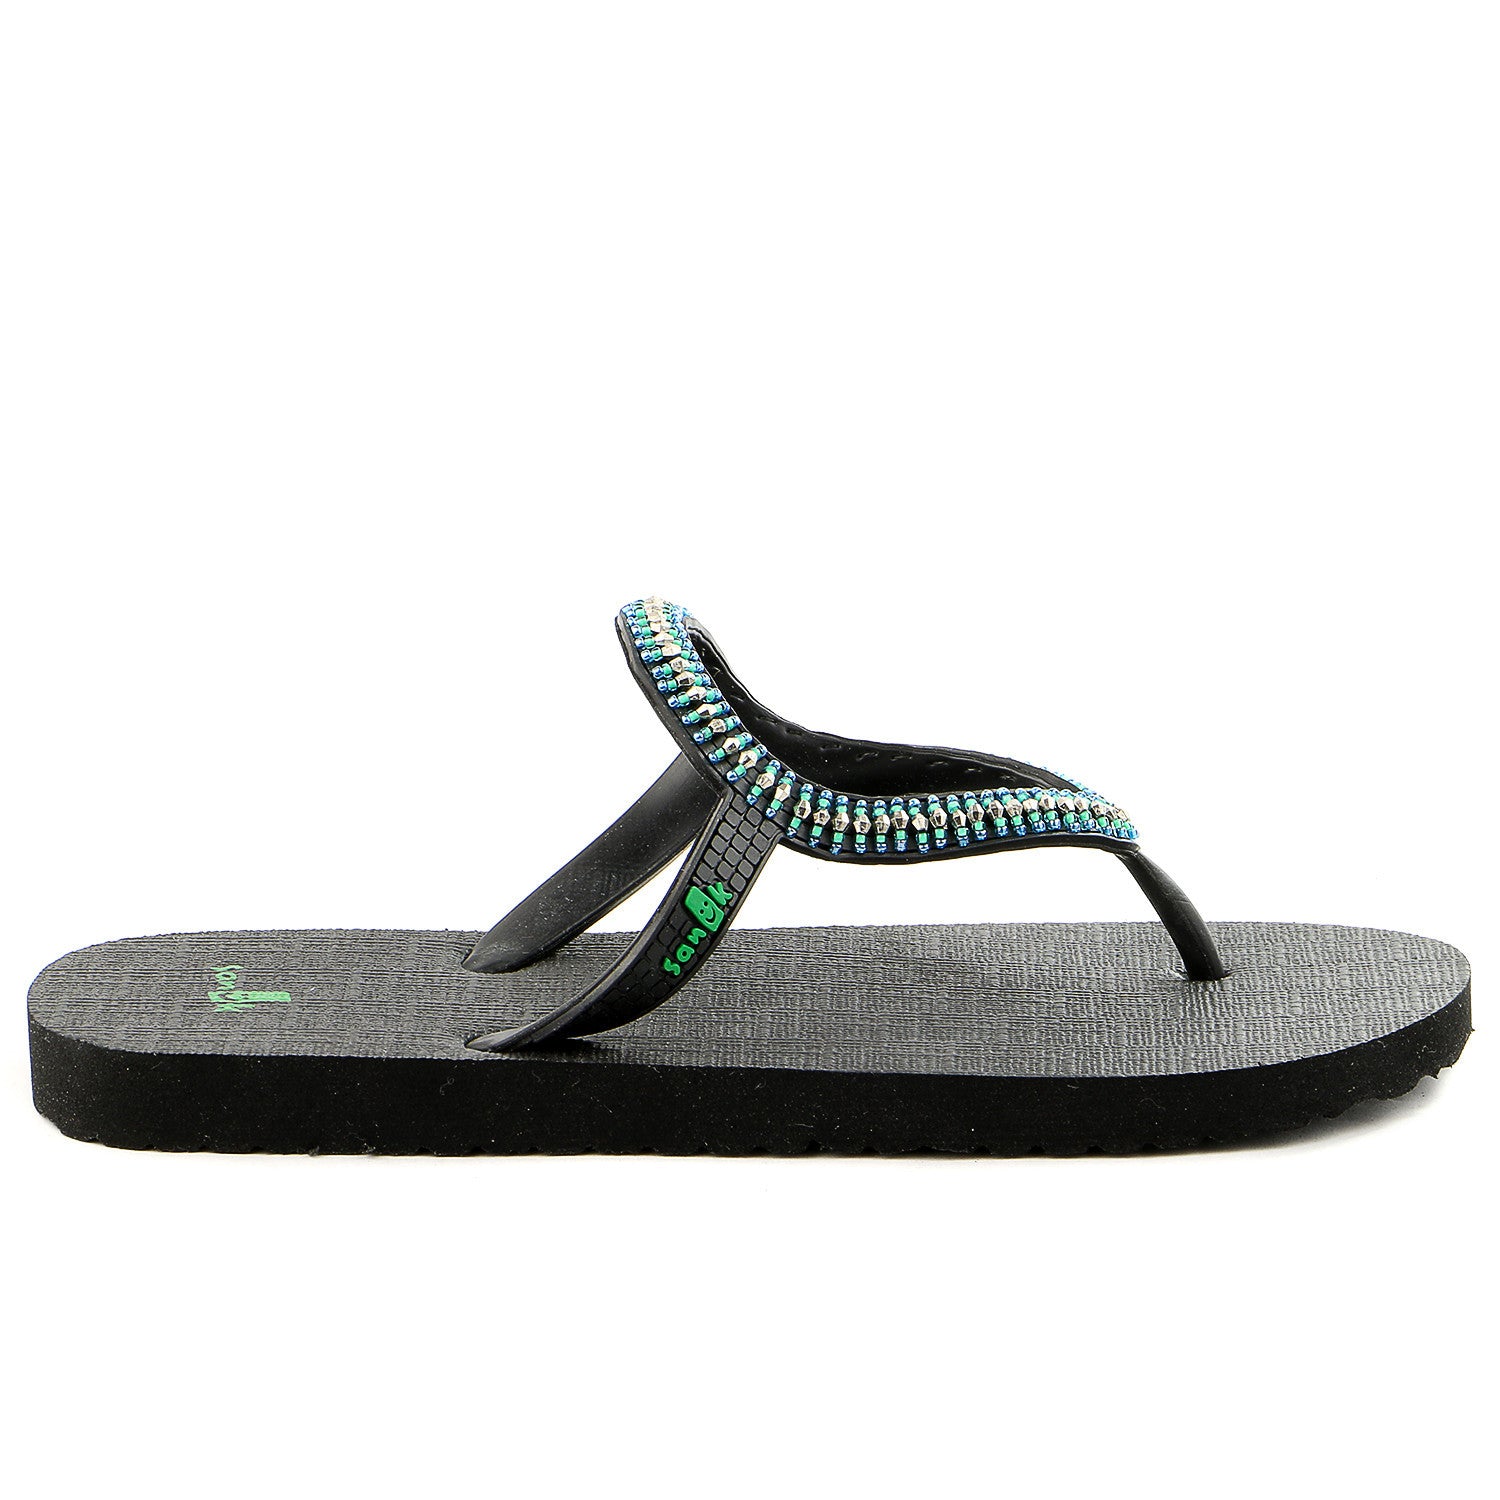 Sanuk Shoes UK  Shoes for Adults and Kids